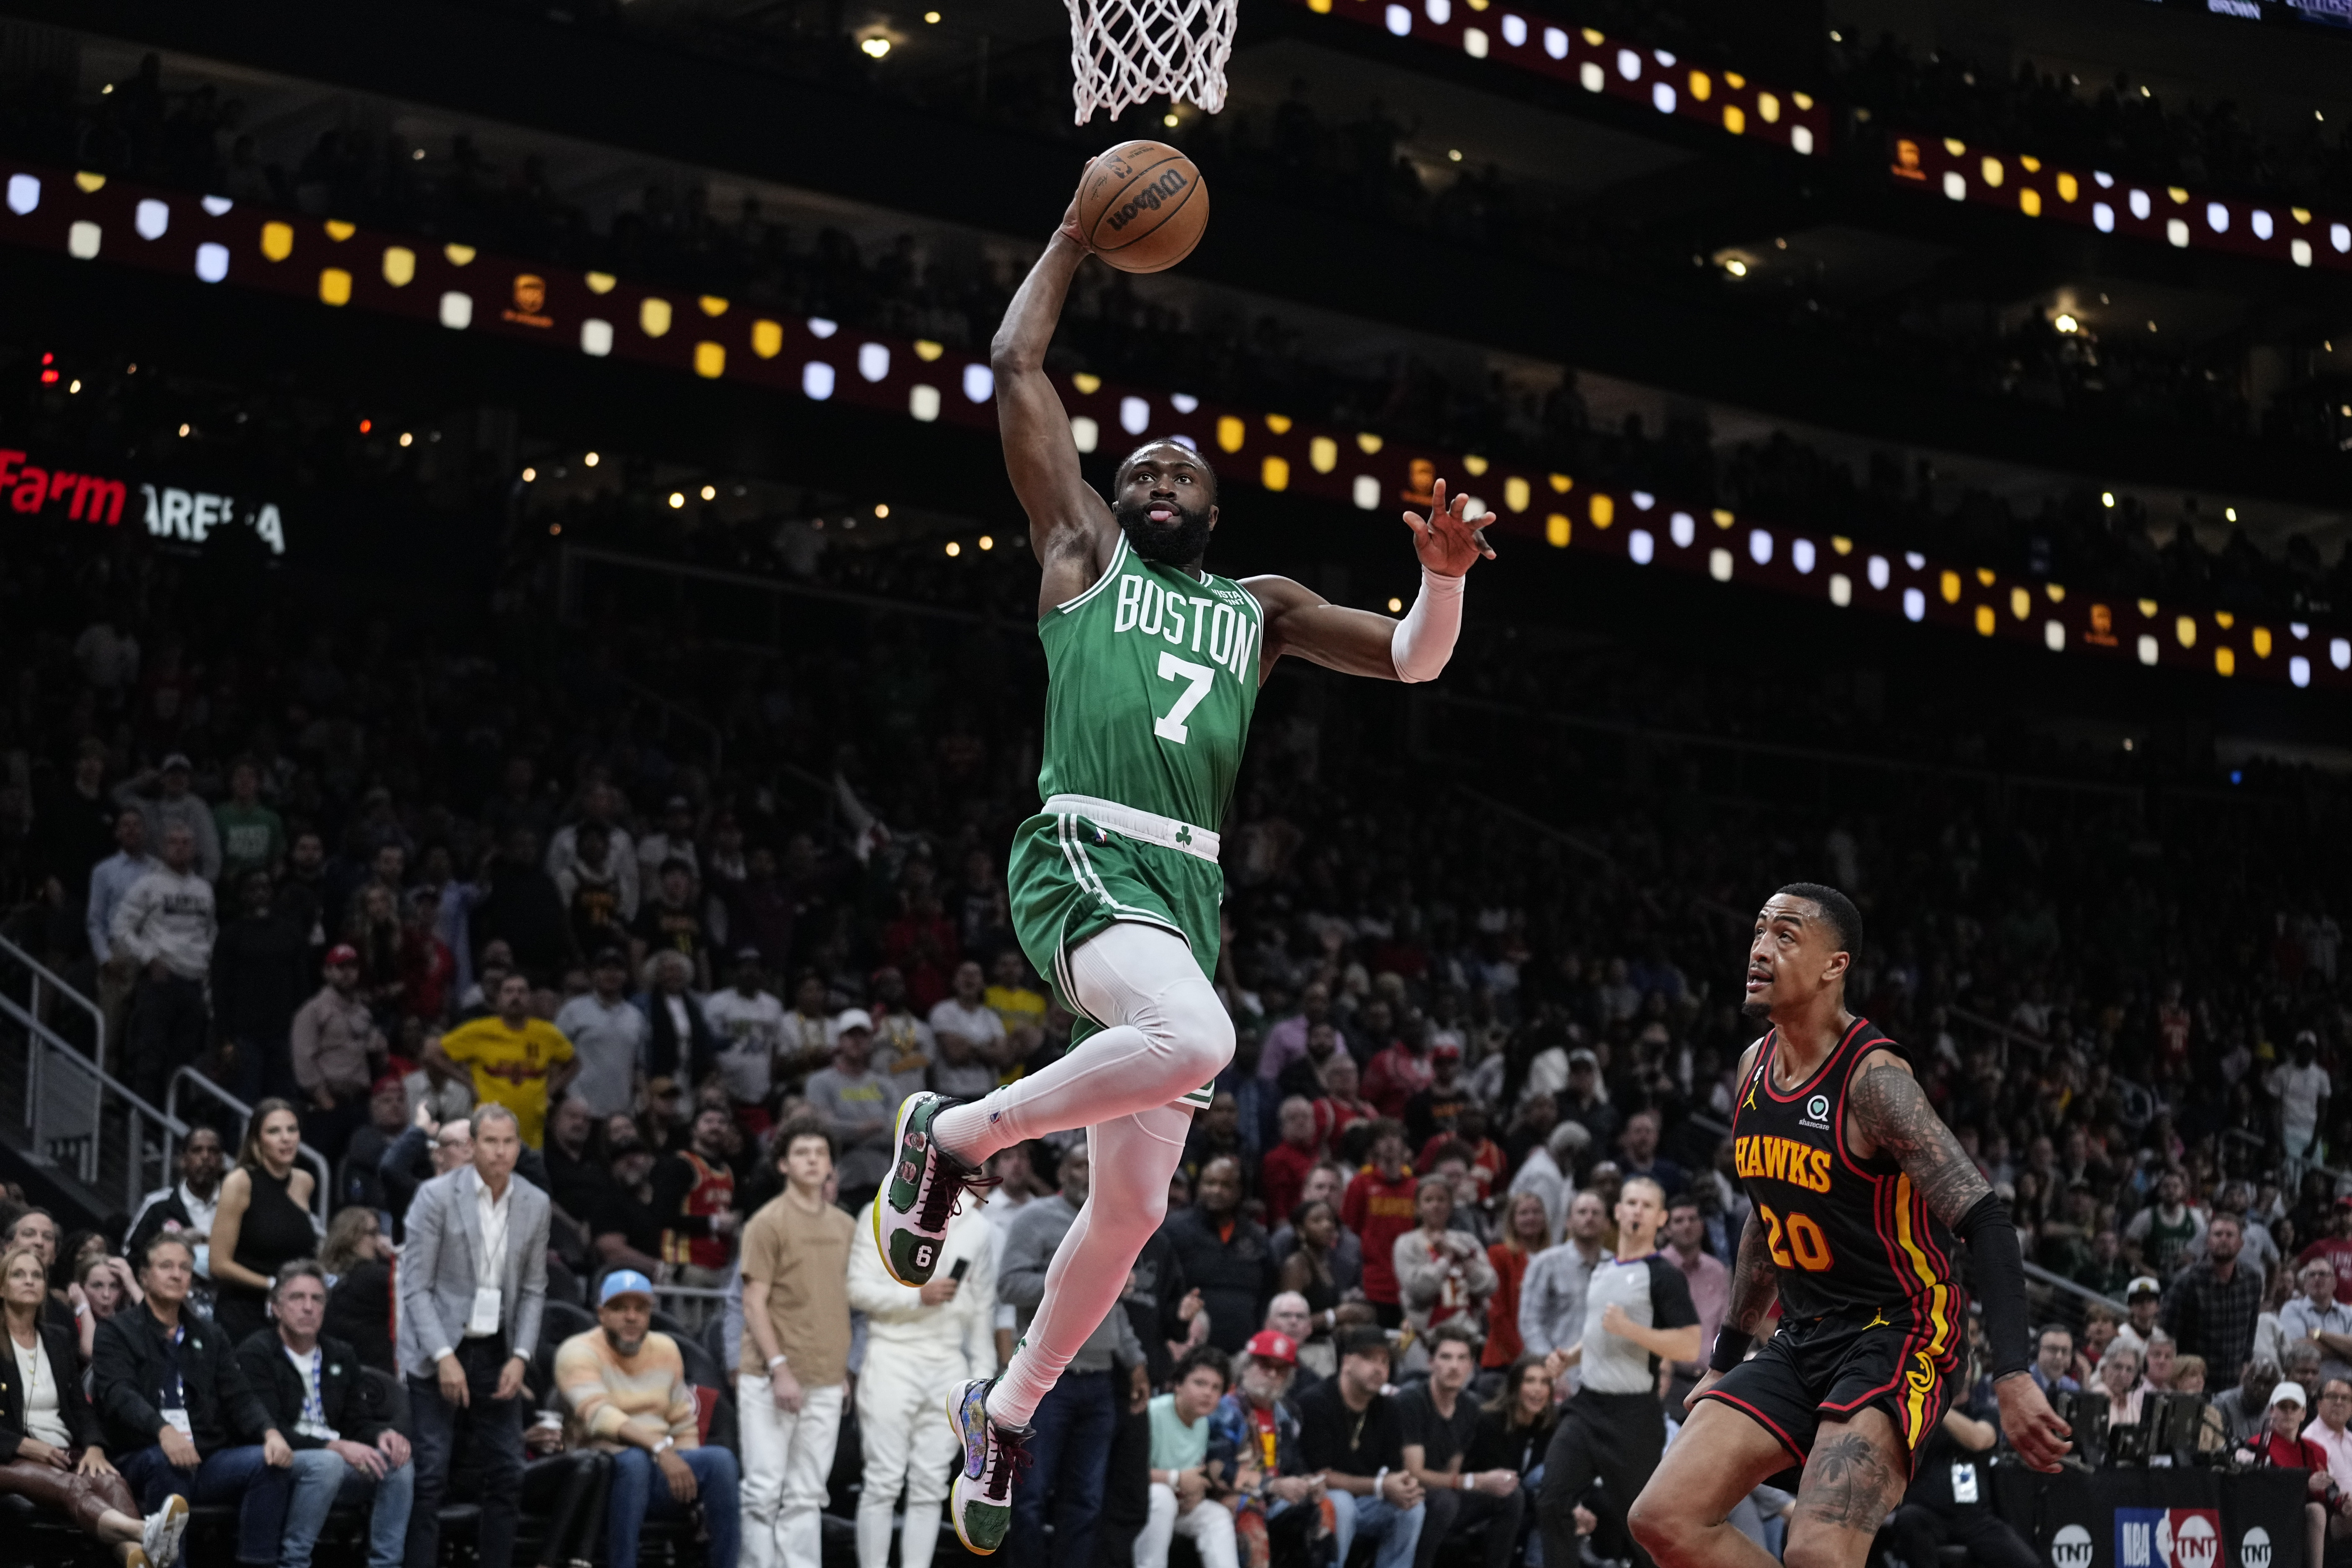 Celtics Star Jaylen Brown 'Tired' Of Wearing Protective Face Mask